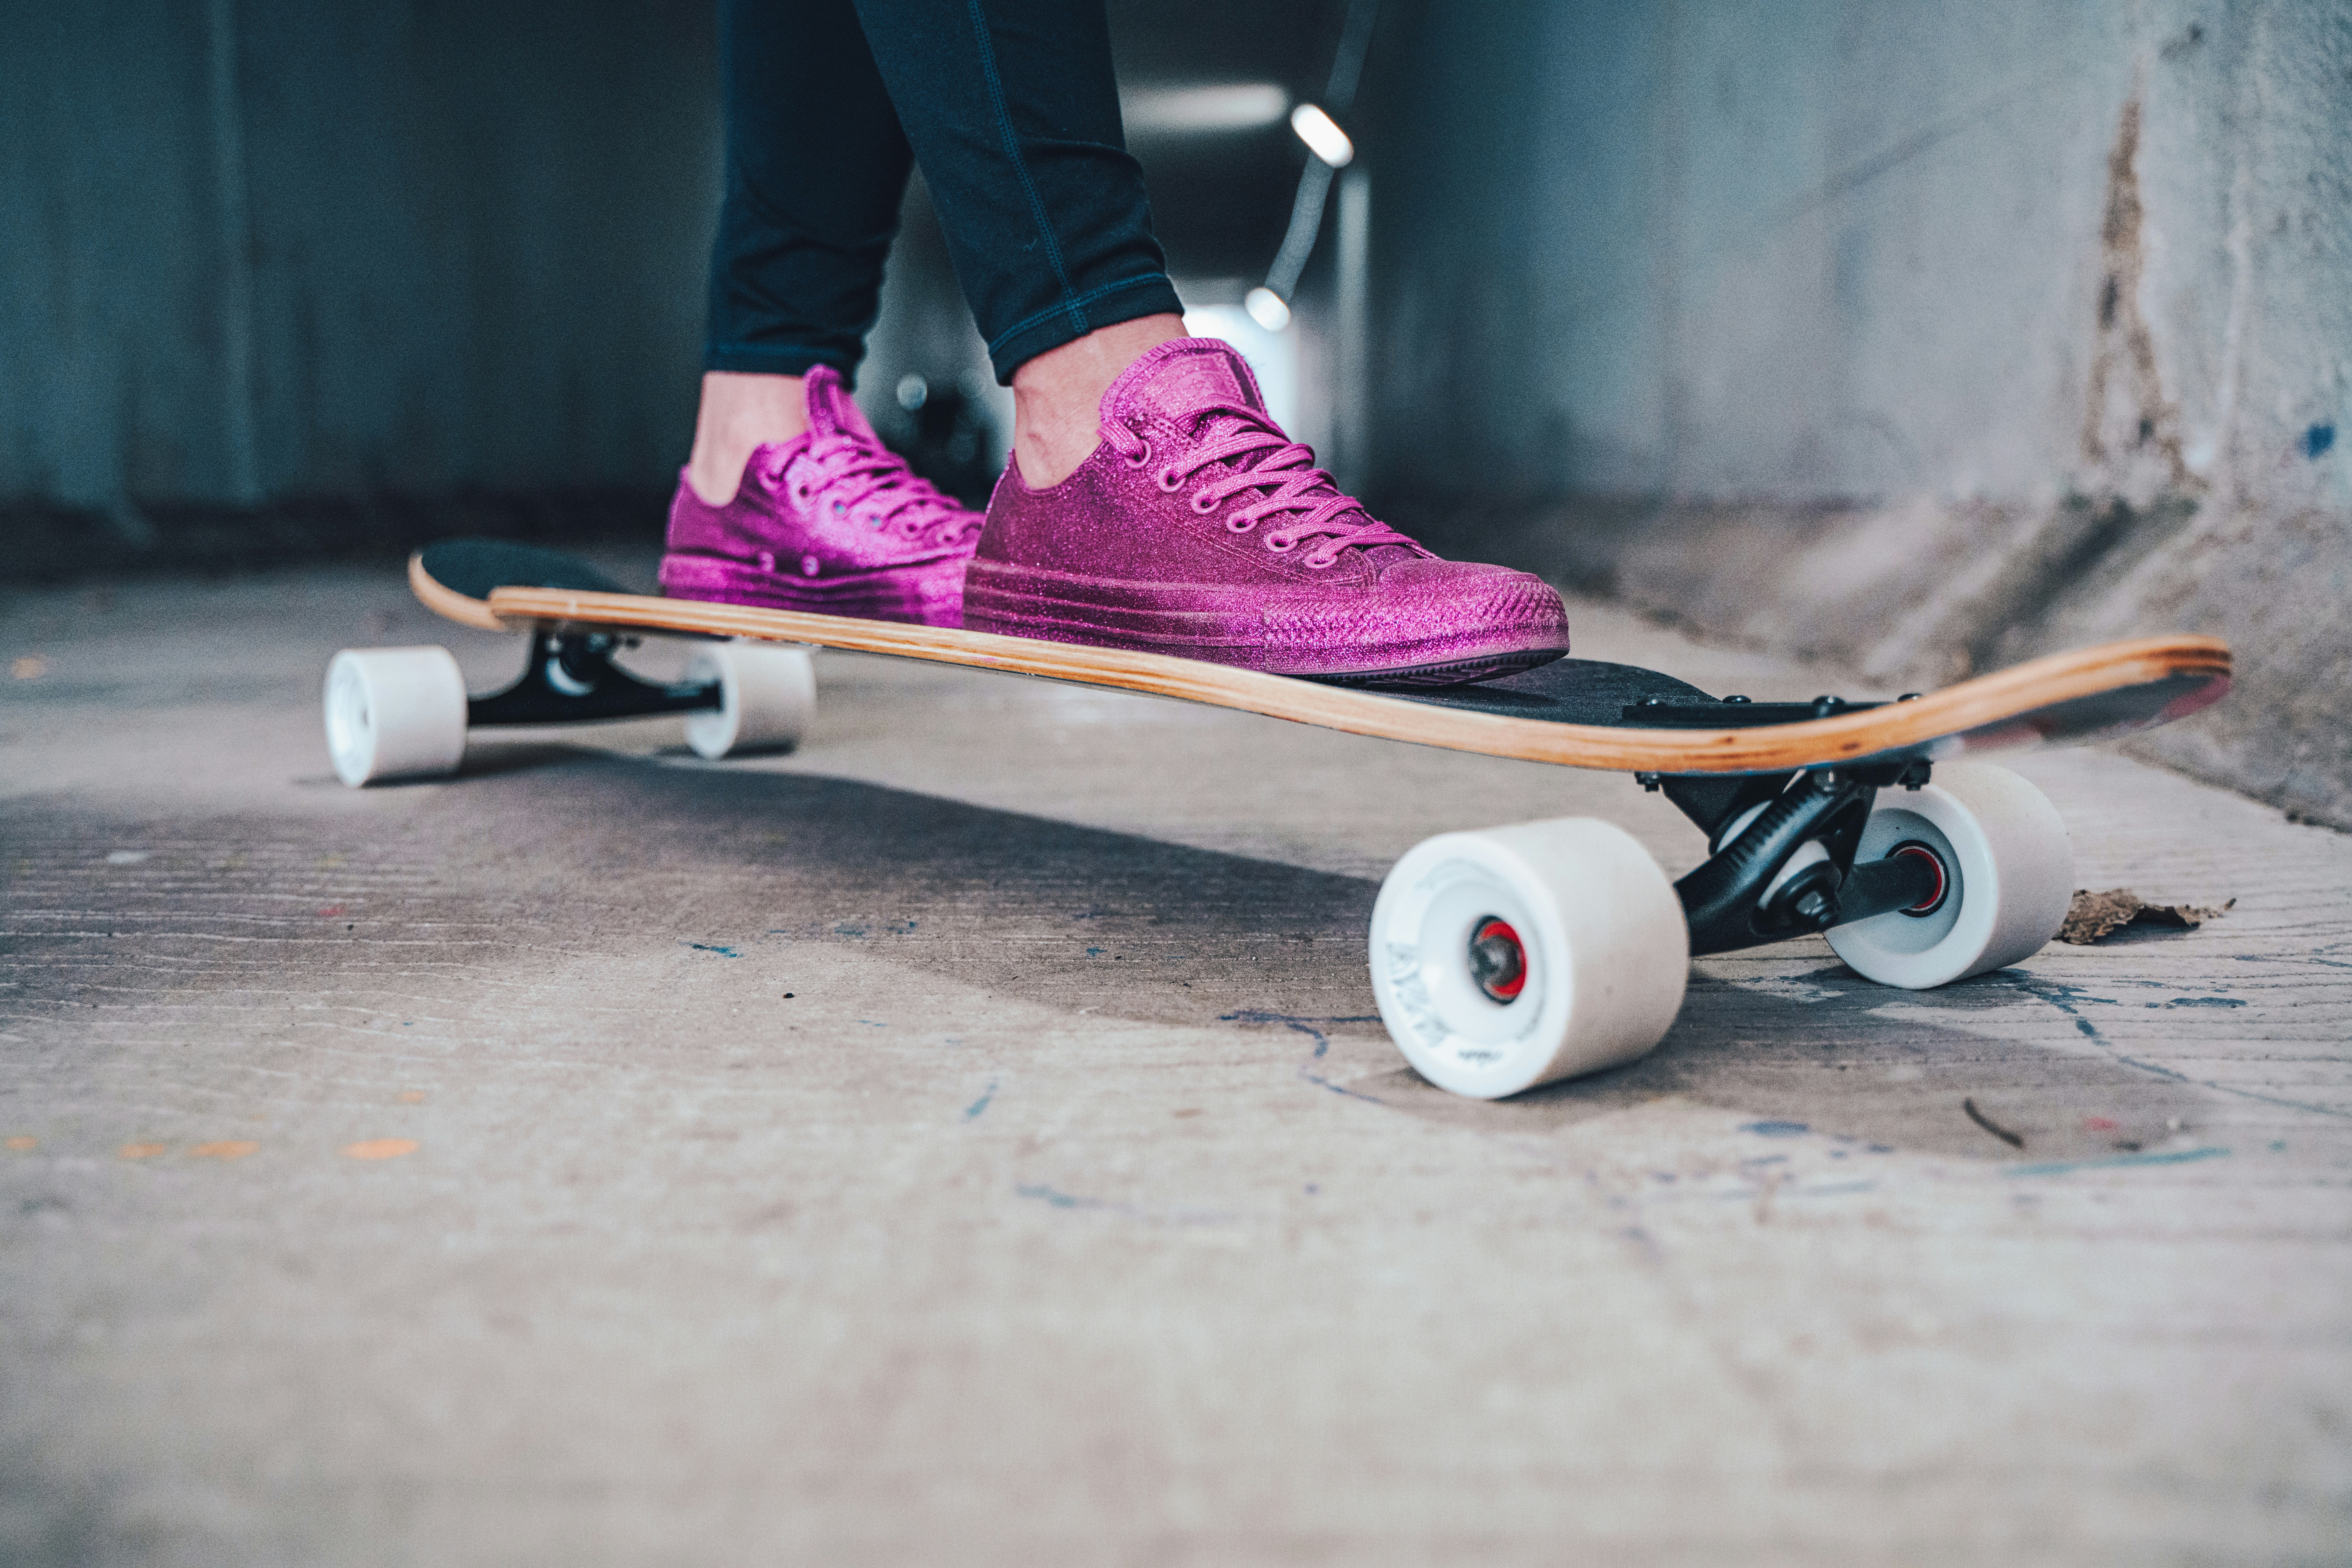 person in purple nike sneakers riding white and black skateboard